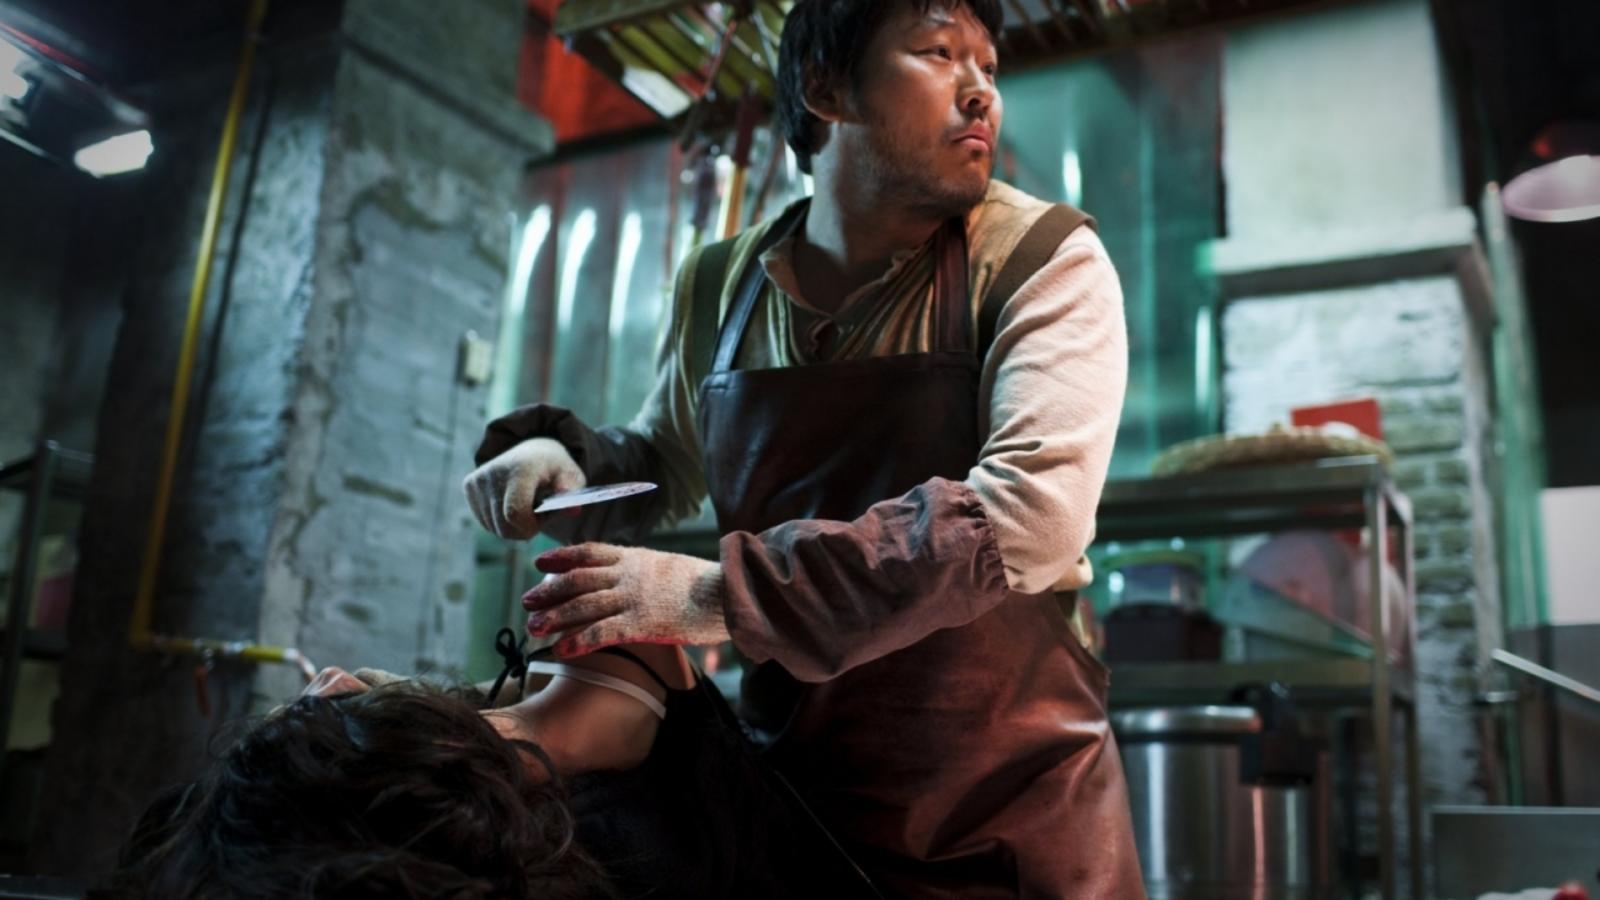 10 South Korean Horror Movies That Will Keep You Up at Night - image 5